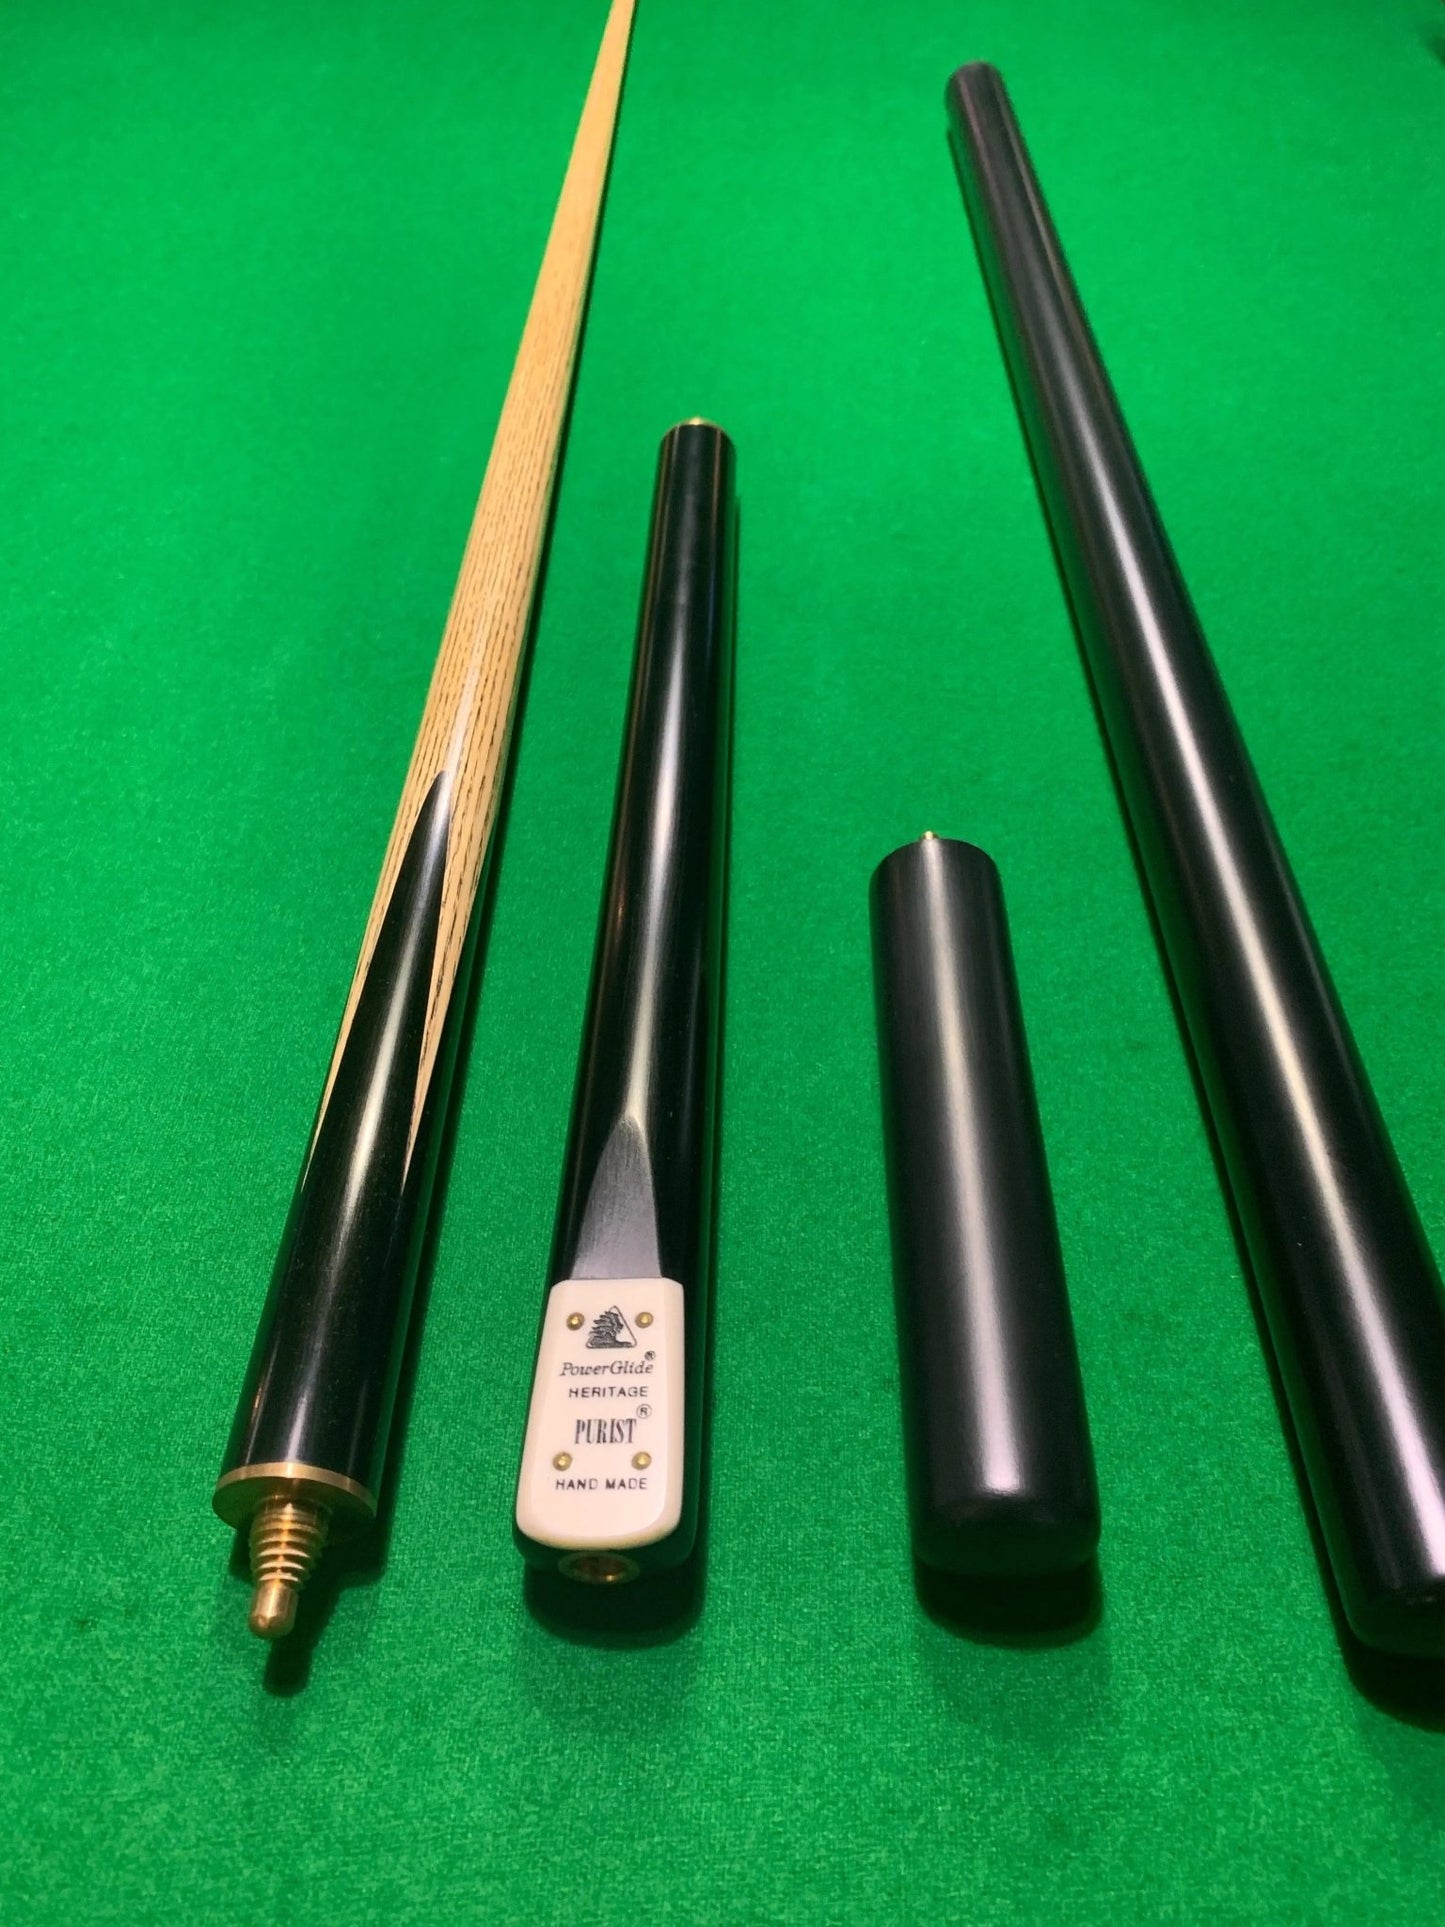 POWERGLIDE Heritage Purist Hand Made 3/4 Pool, Snooker & Billiard Ash Cue with Butt Extension - Q-Masters